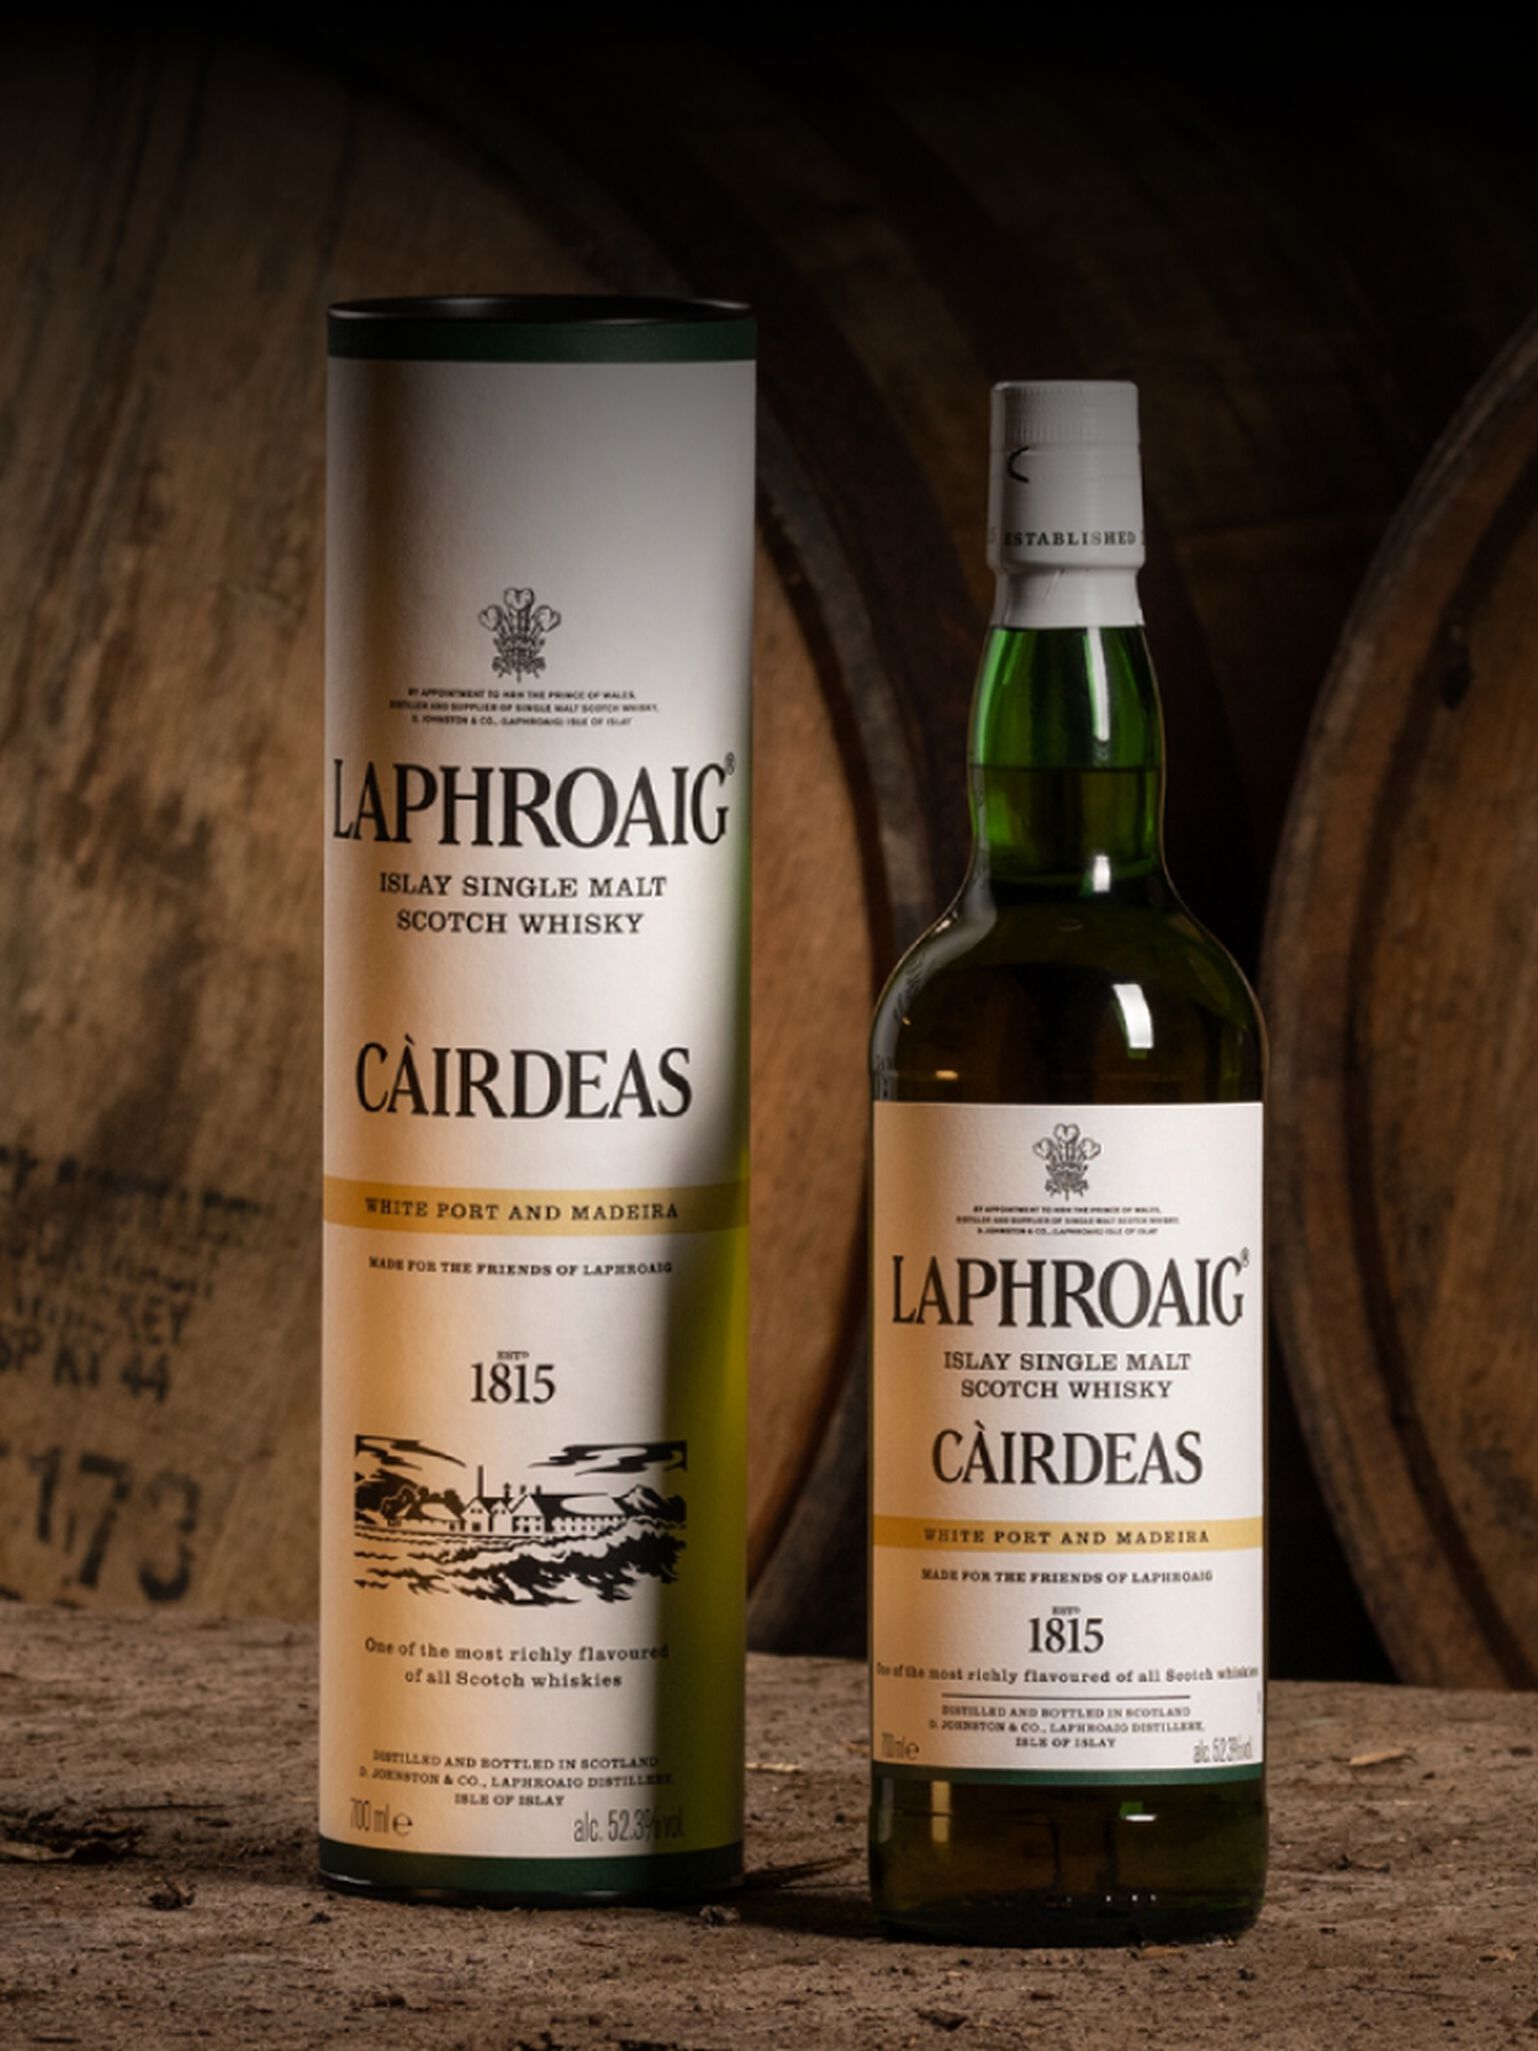 Bottle of Laphroaig Càirdeas 2023 White Port & Madeira with the gifting sleeve it comes in sitting in front of barrels